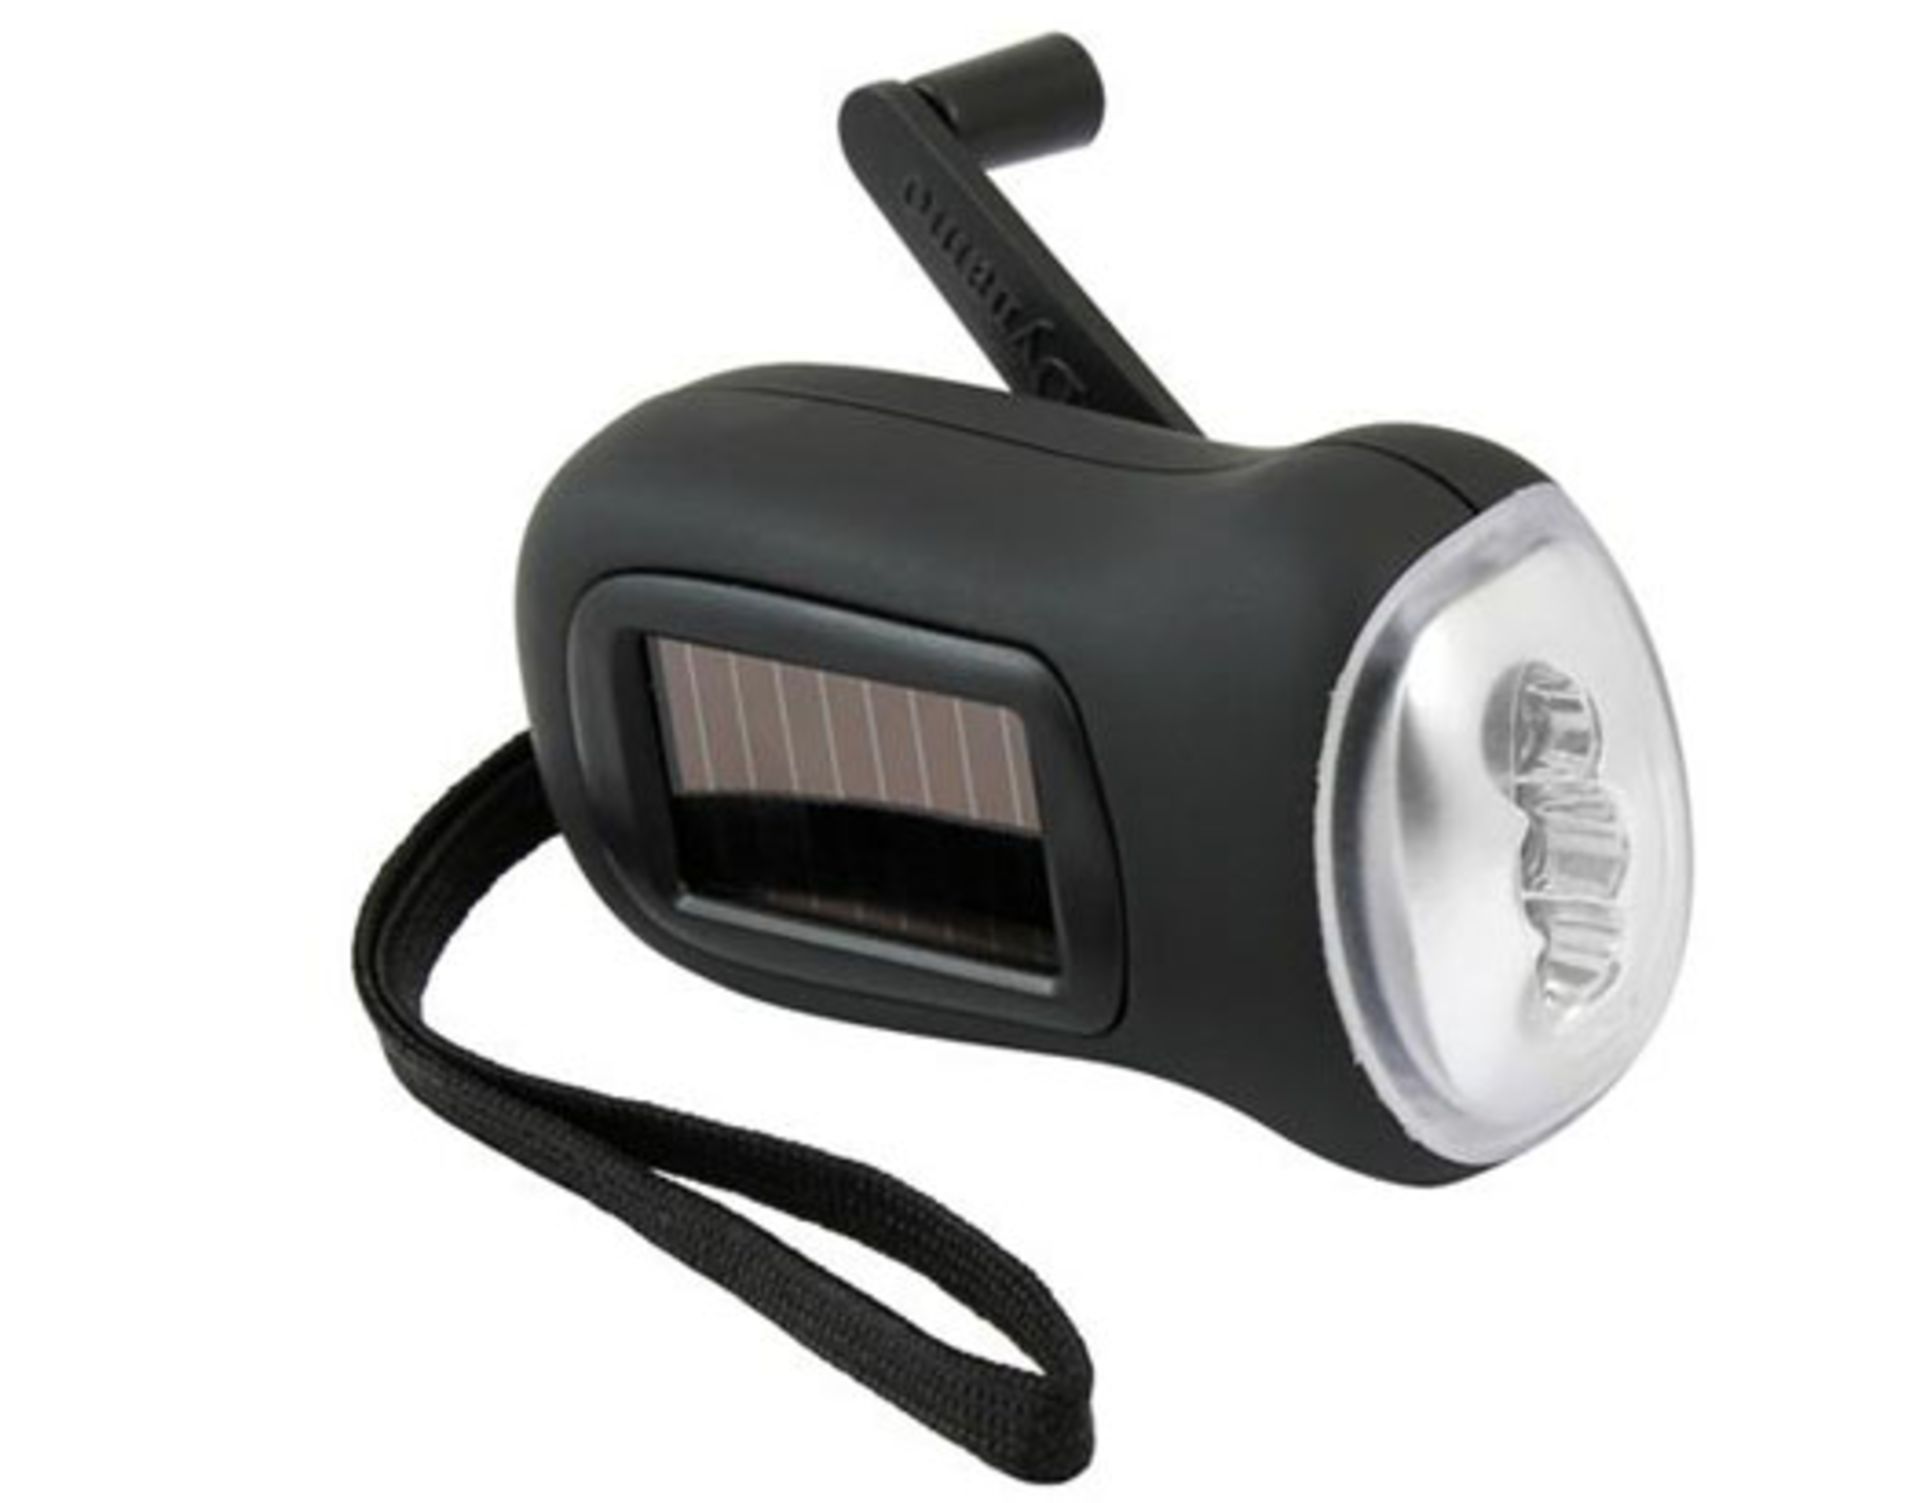 V *TRADE QTY* Brand New 3 LED Wind Up Solar Torch X 6 Bid price to be multiplied by Six